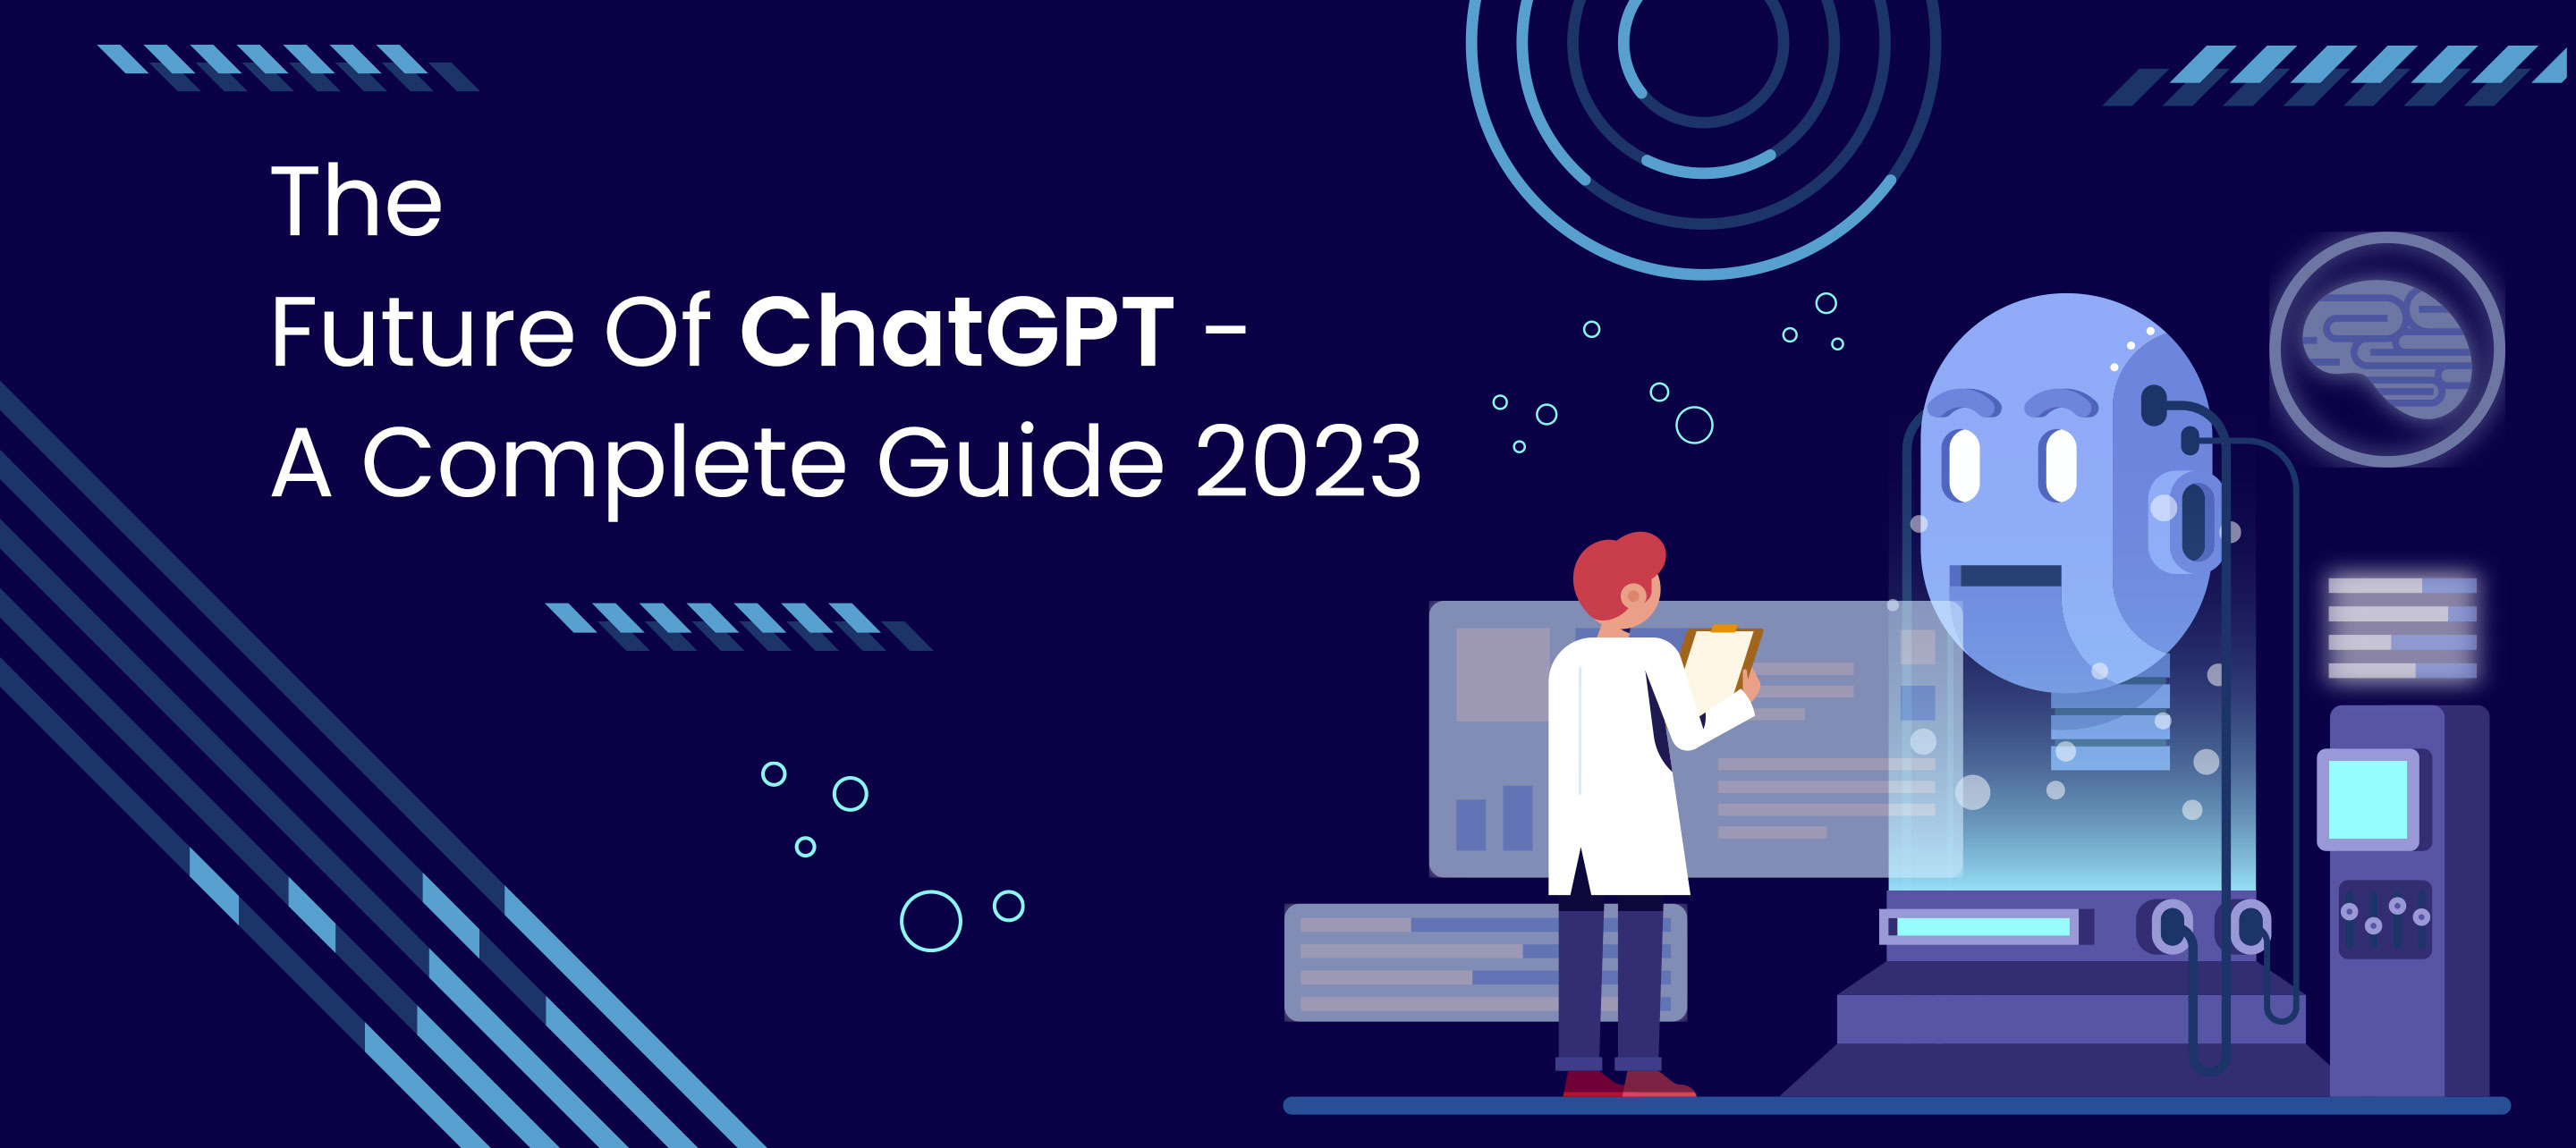 The Future Of ChatGPT